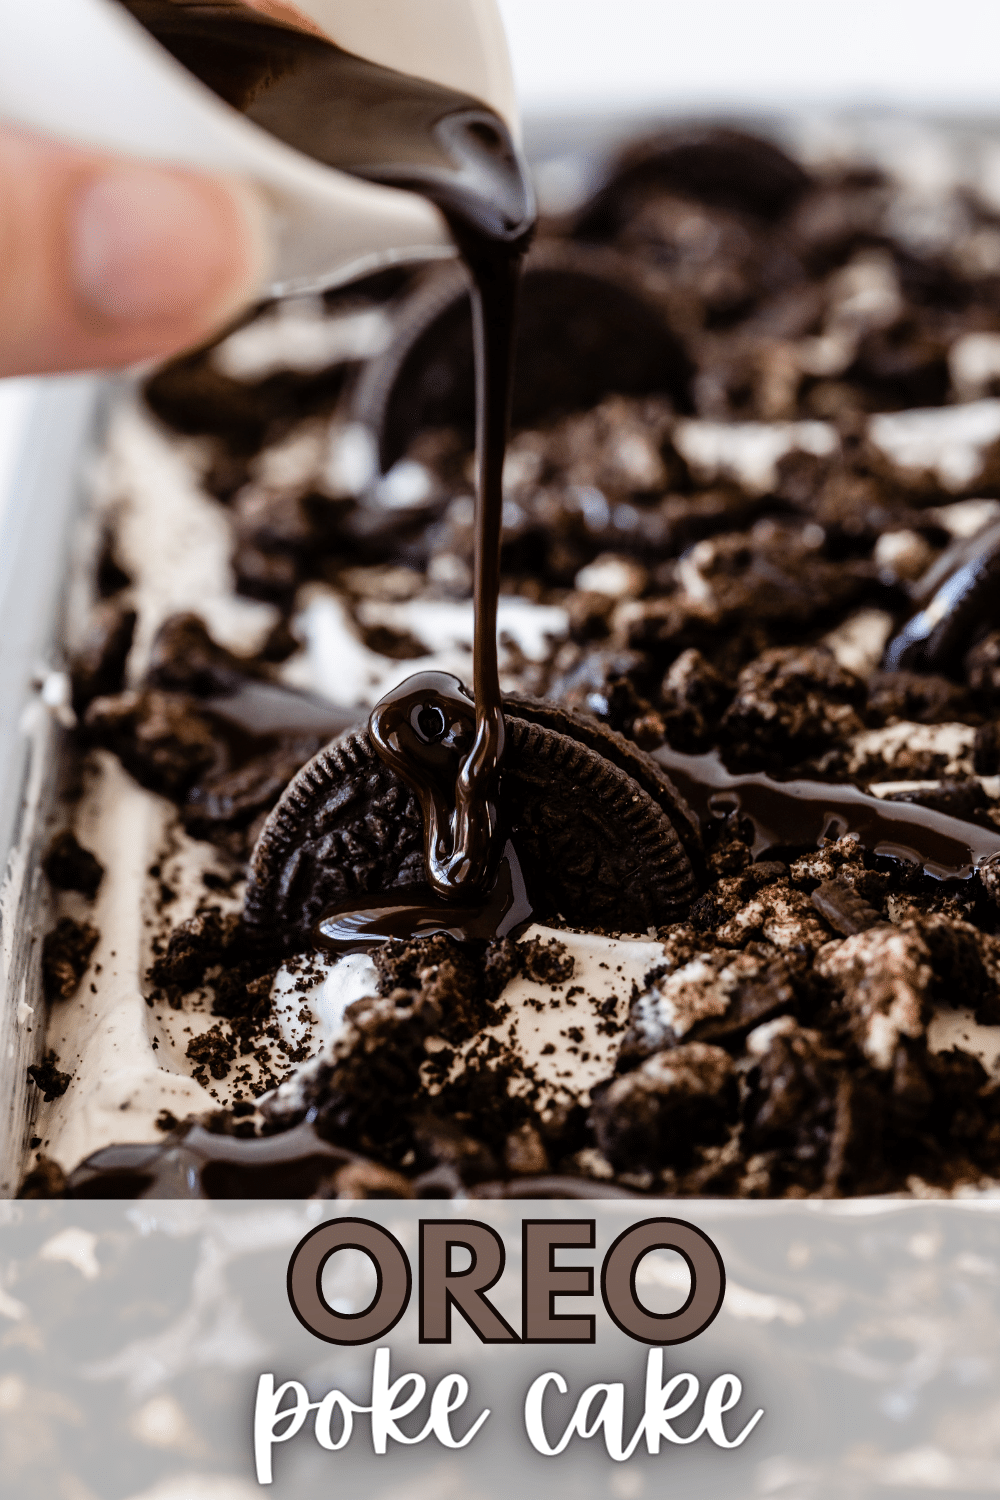 Whenever I want to make a delicious cake for any occasion, I get my trusted recipe book out and go straight to this Oreo poke cake recipe. #pokecake #oreopokecake #cake #dessert #recipe via @wondermomwannab